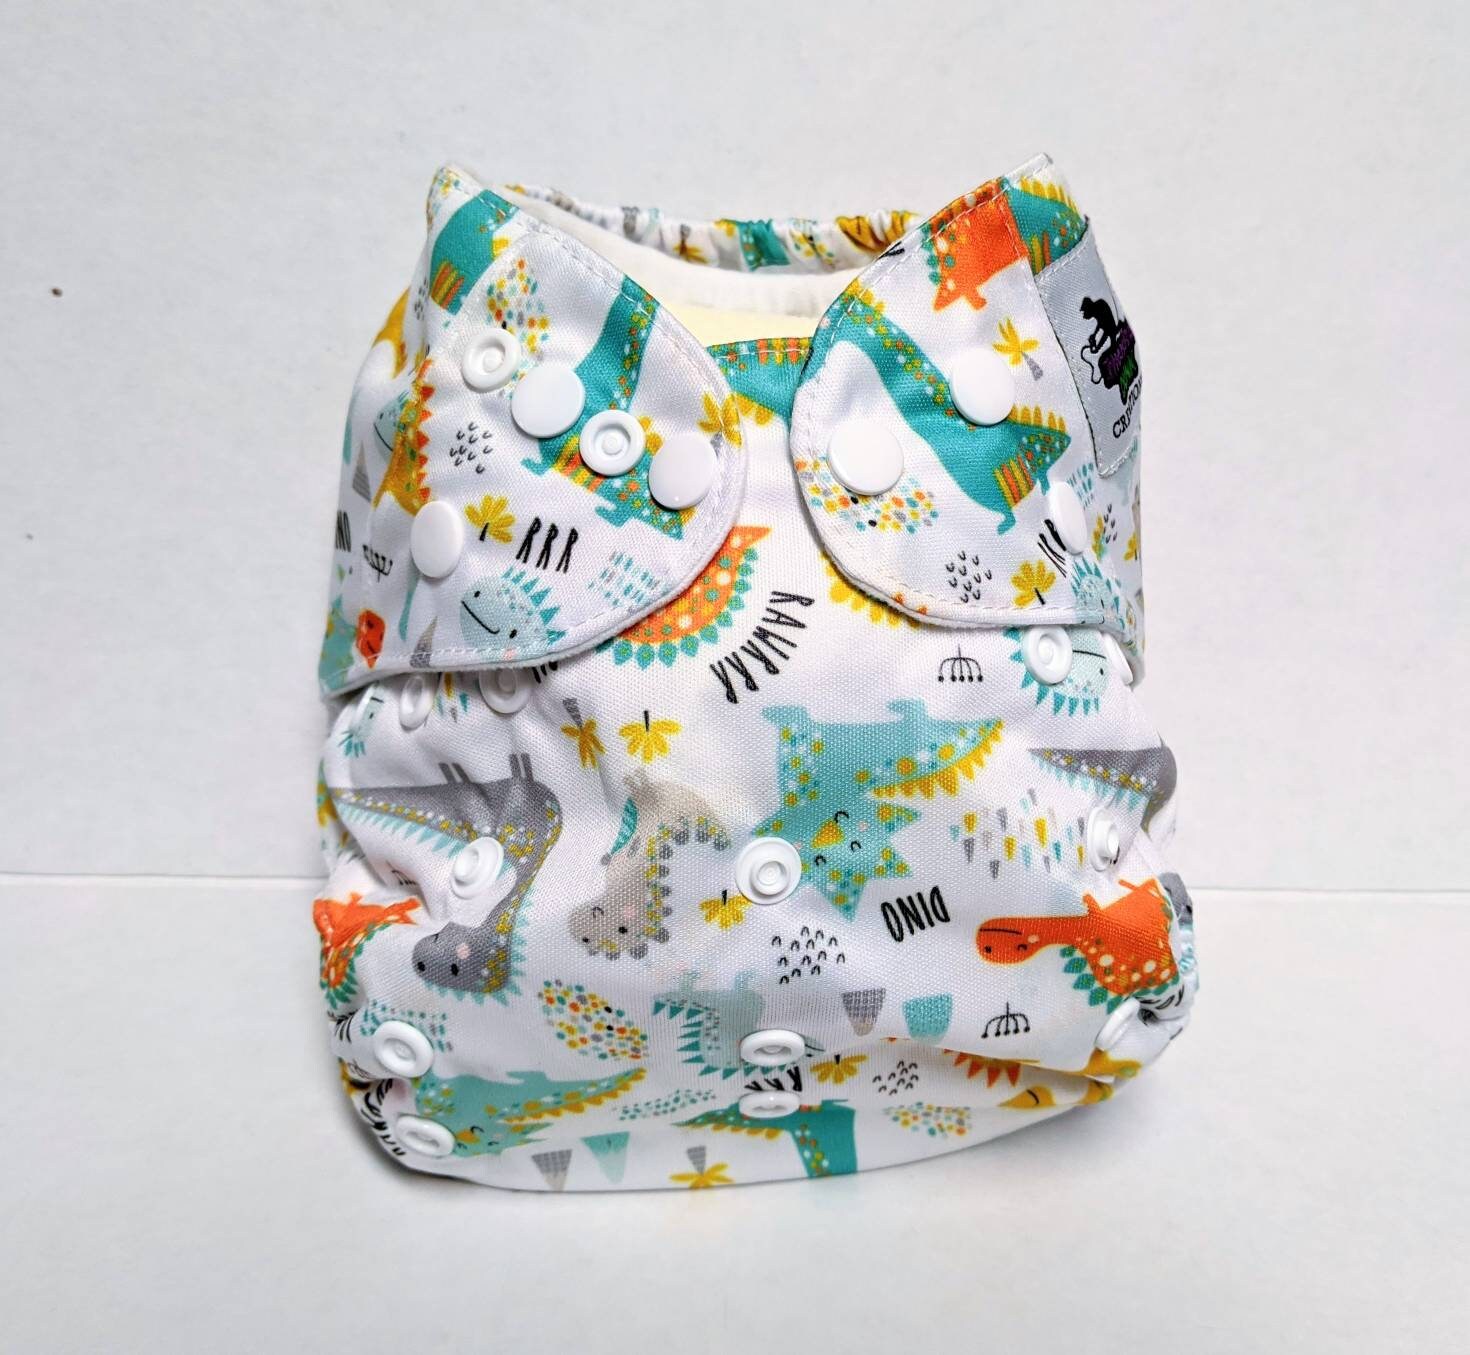 Zorb 3D Bamboo Boosters for Cloth Diapers (with your choice of topping  fabric)